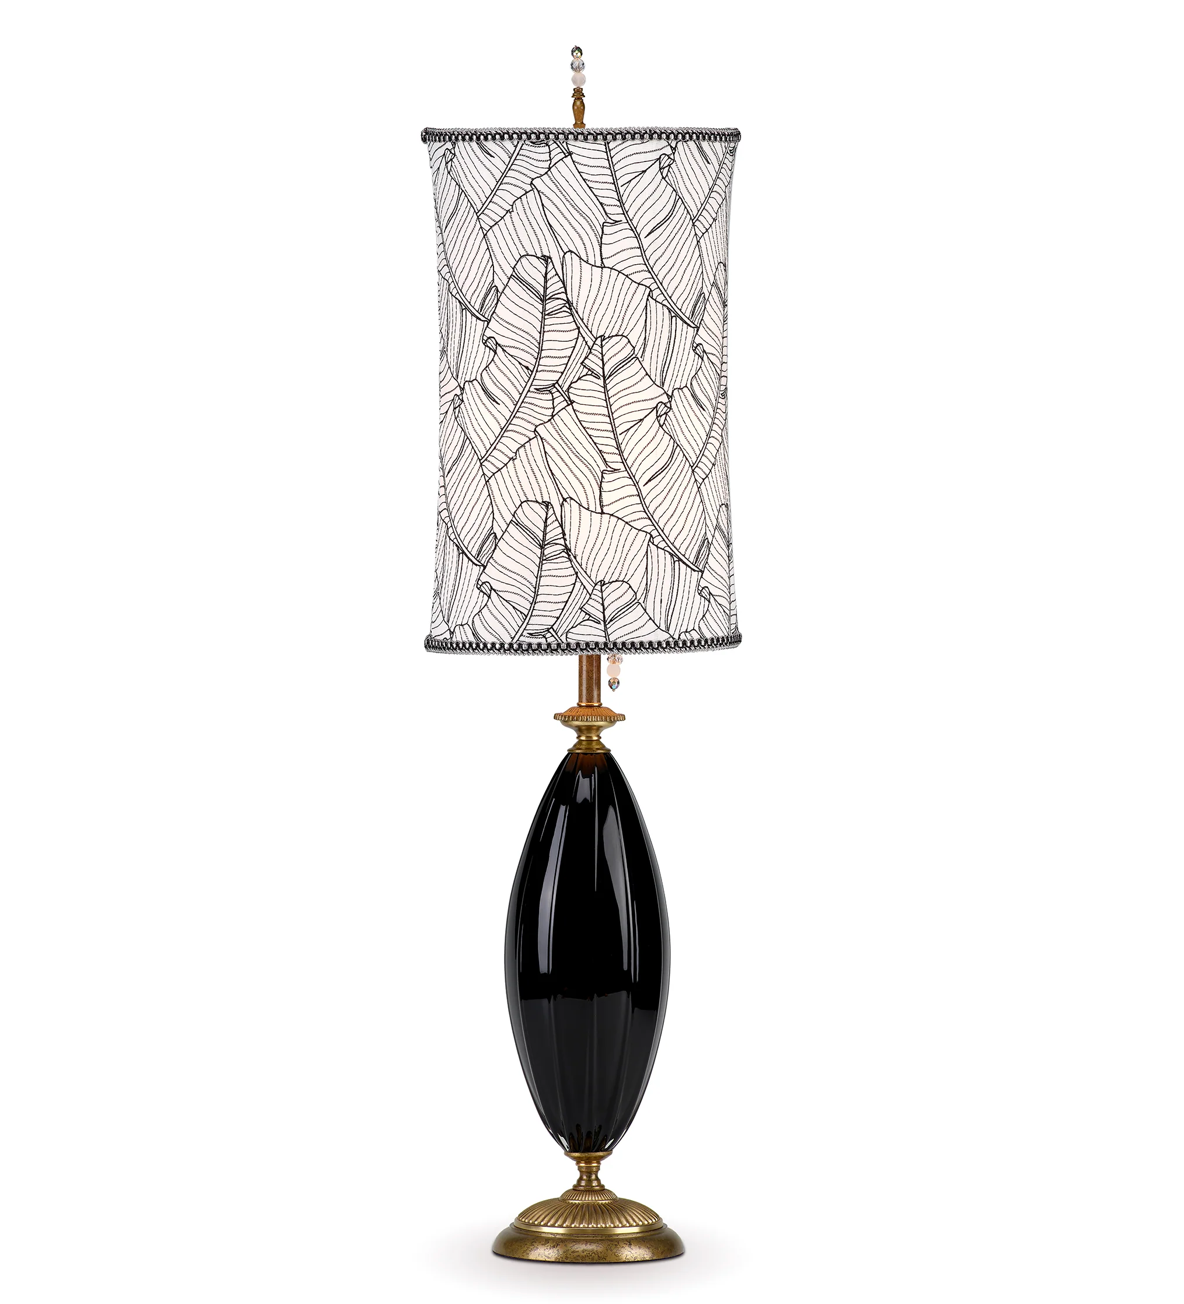 Kinzig Design "Molly" table lamp (IN STOCK)